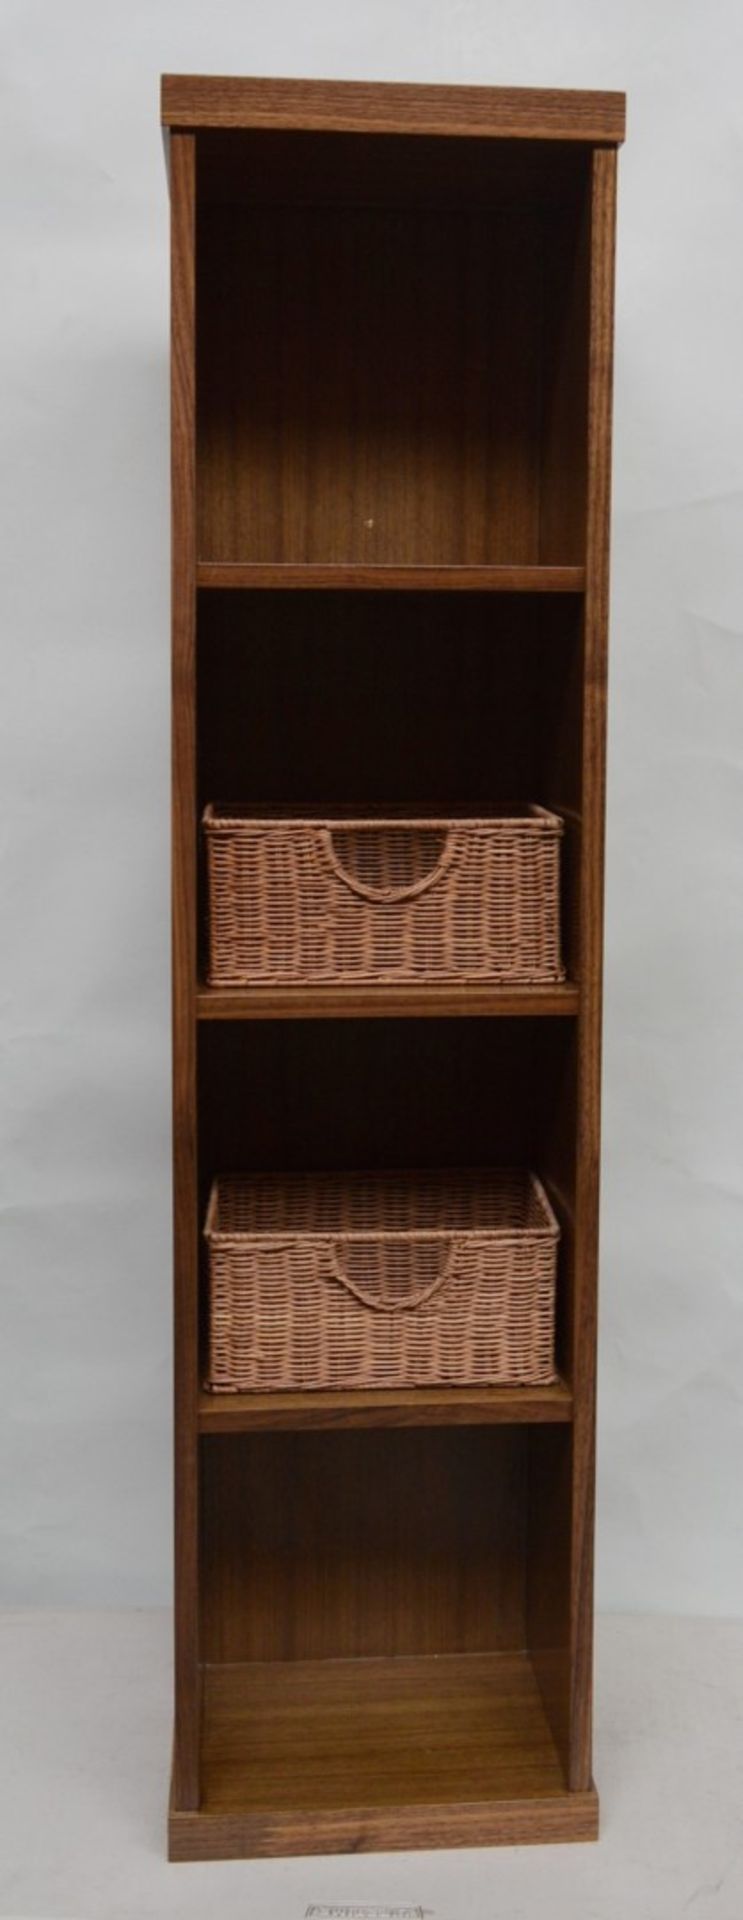 1 x Vogue ARC Series 2 Bathroom Storage Shelving Unit - Wall Mounted or Floor Standing - WALNUT - Image 9 of 9